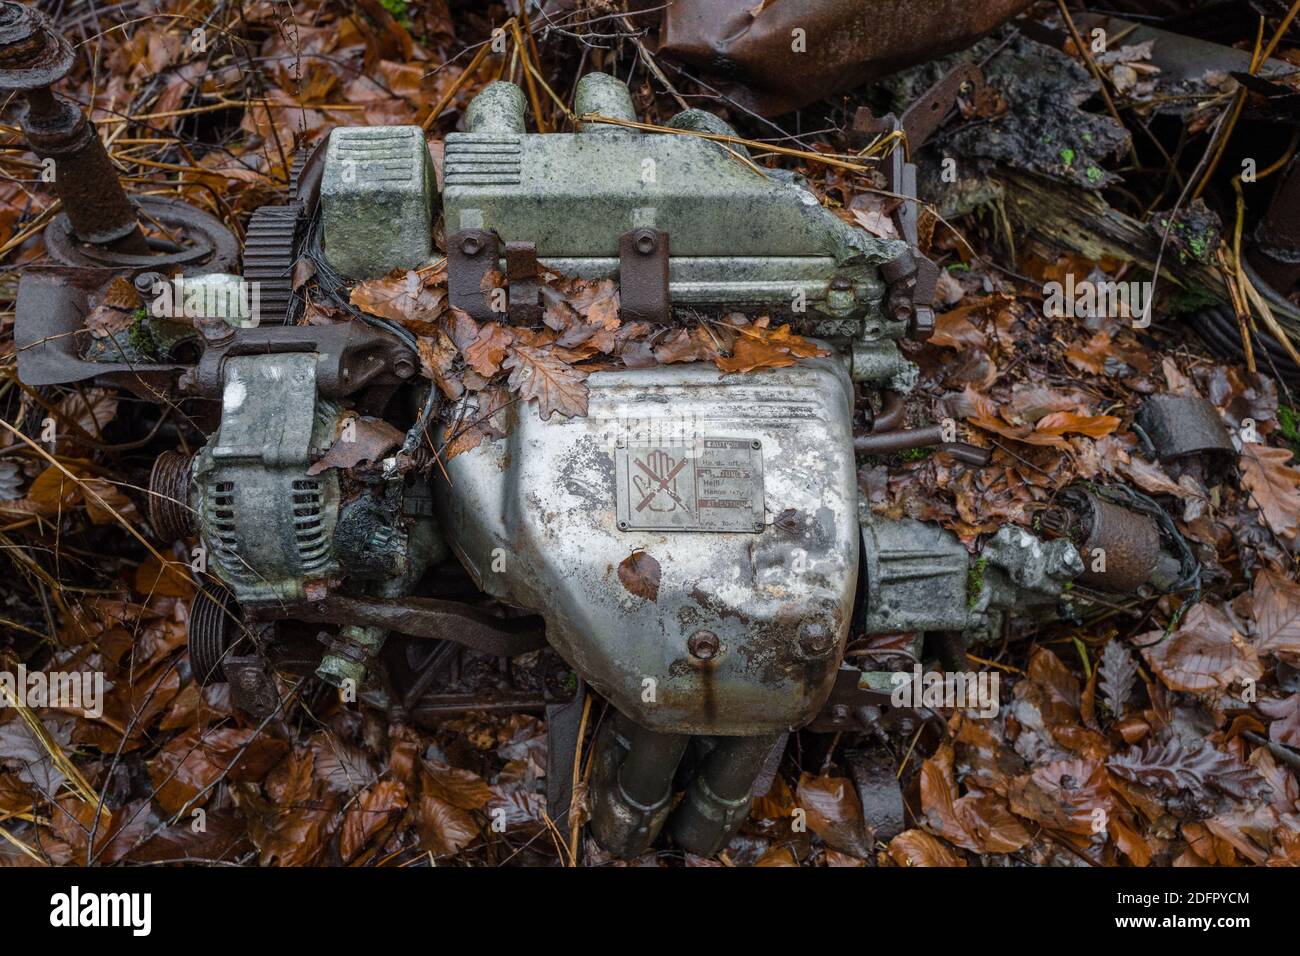 Engine remains of a burnt out car. Stock Photo